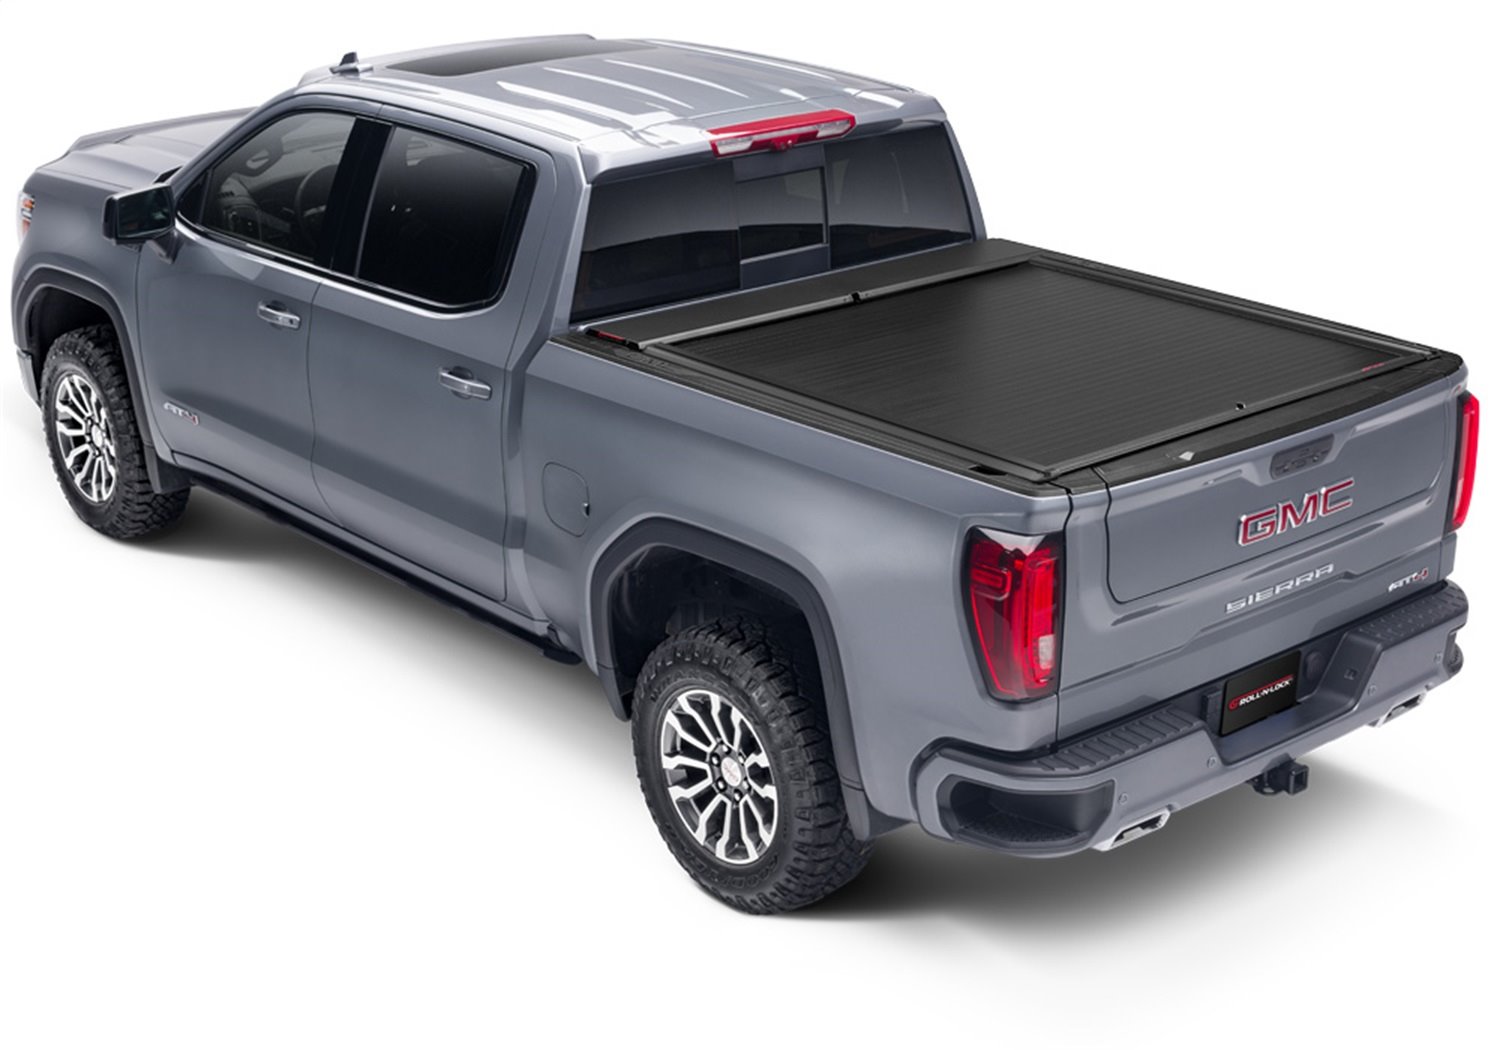 571A-XT A-Series XT Locking Retractable Truck Bed Cover for 2007-2021 Toyota Tundra Regular/Double Cab [6.7 ft. Bed]